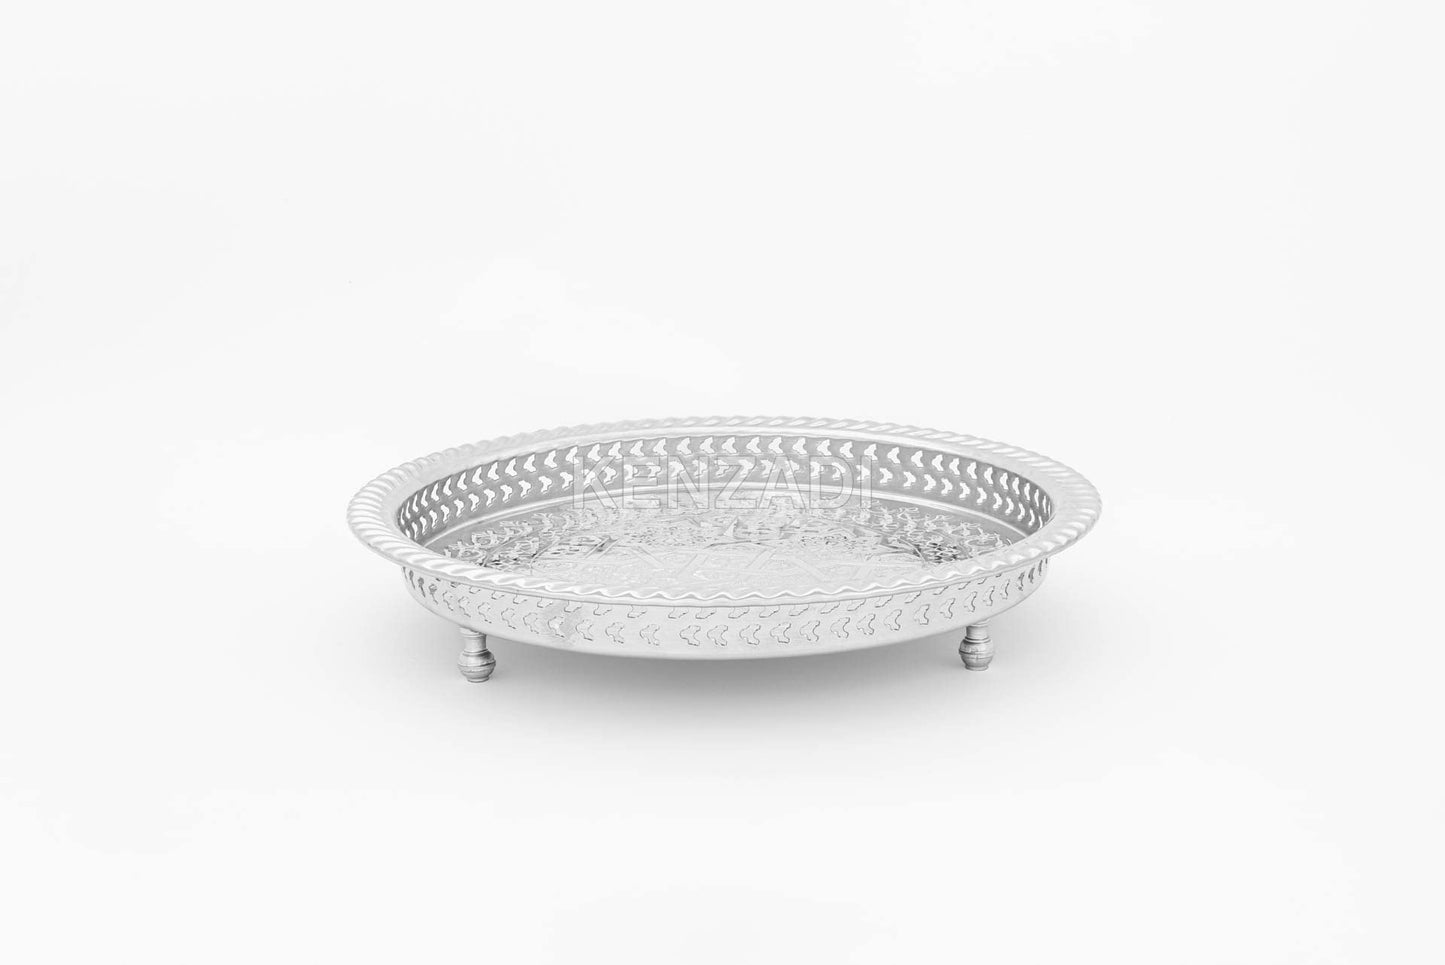 14.1 Inch Moroccan Handmade Serving Tea Tray Silver Plated Brass Handcrafted Plate in Fez Morocco - Handmade by My Poufs